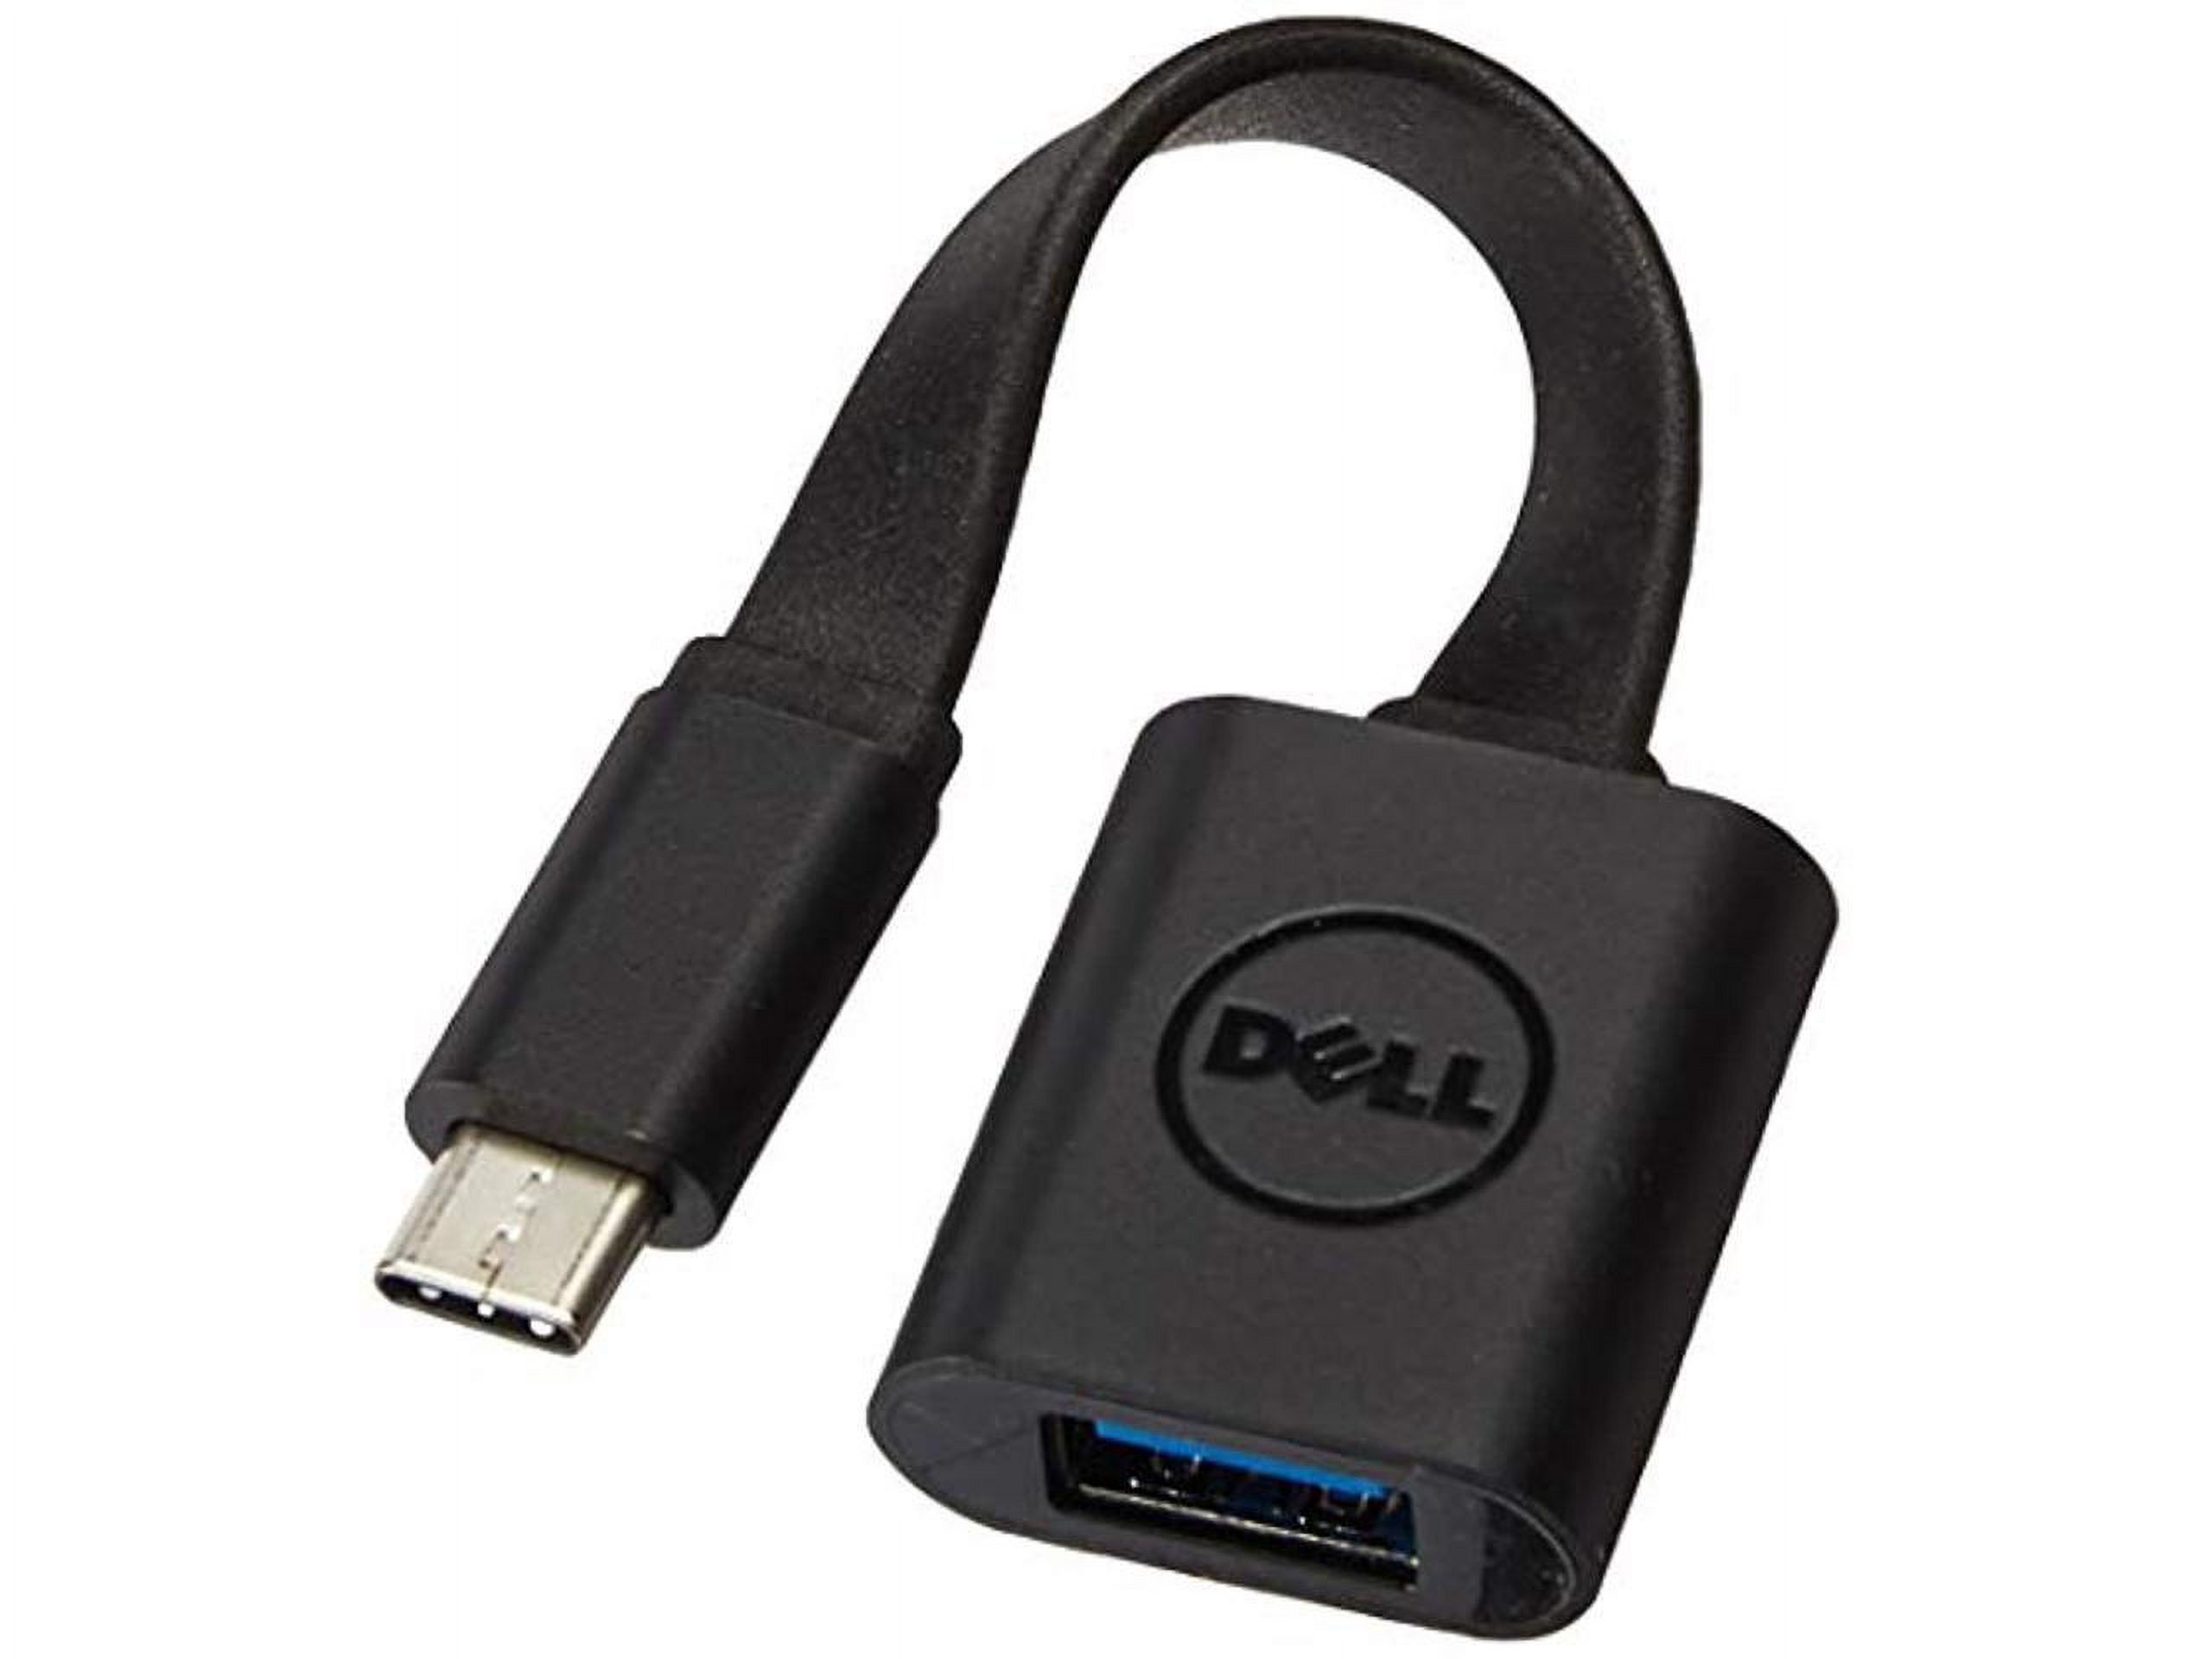 Dell DBQBJBC054 USB-C to USB-A Data Transfer Cable - image 4 of 11